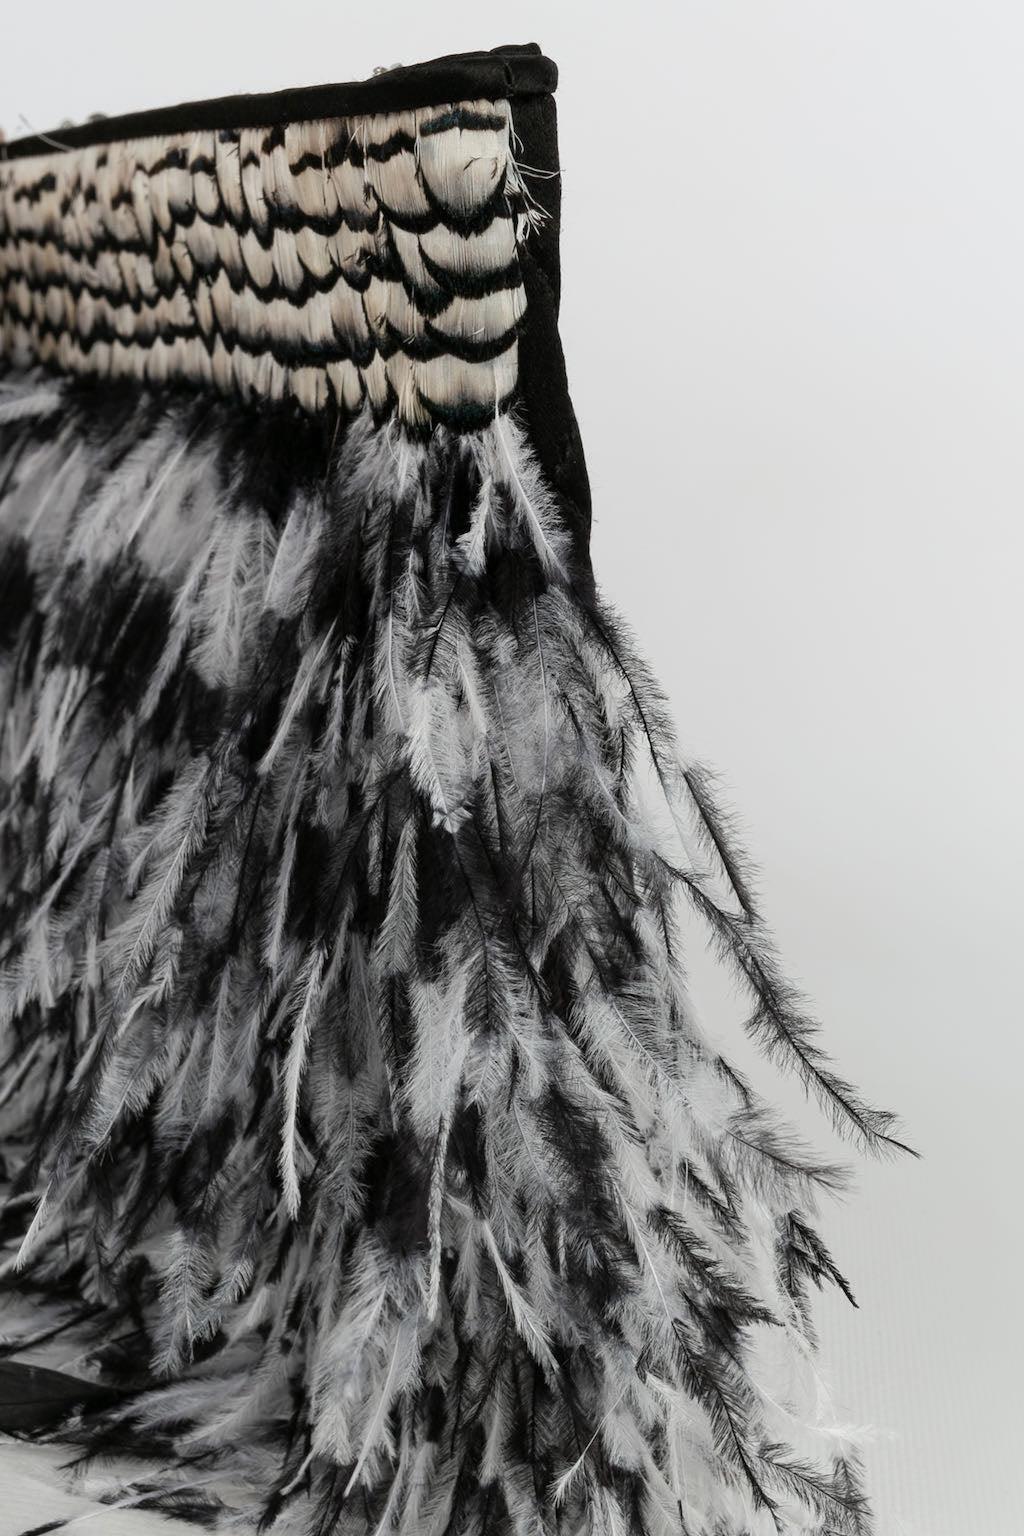 Women's Chanel Clutch Silk Bag in Black and White Feathers, 2011